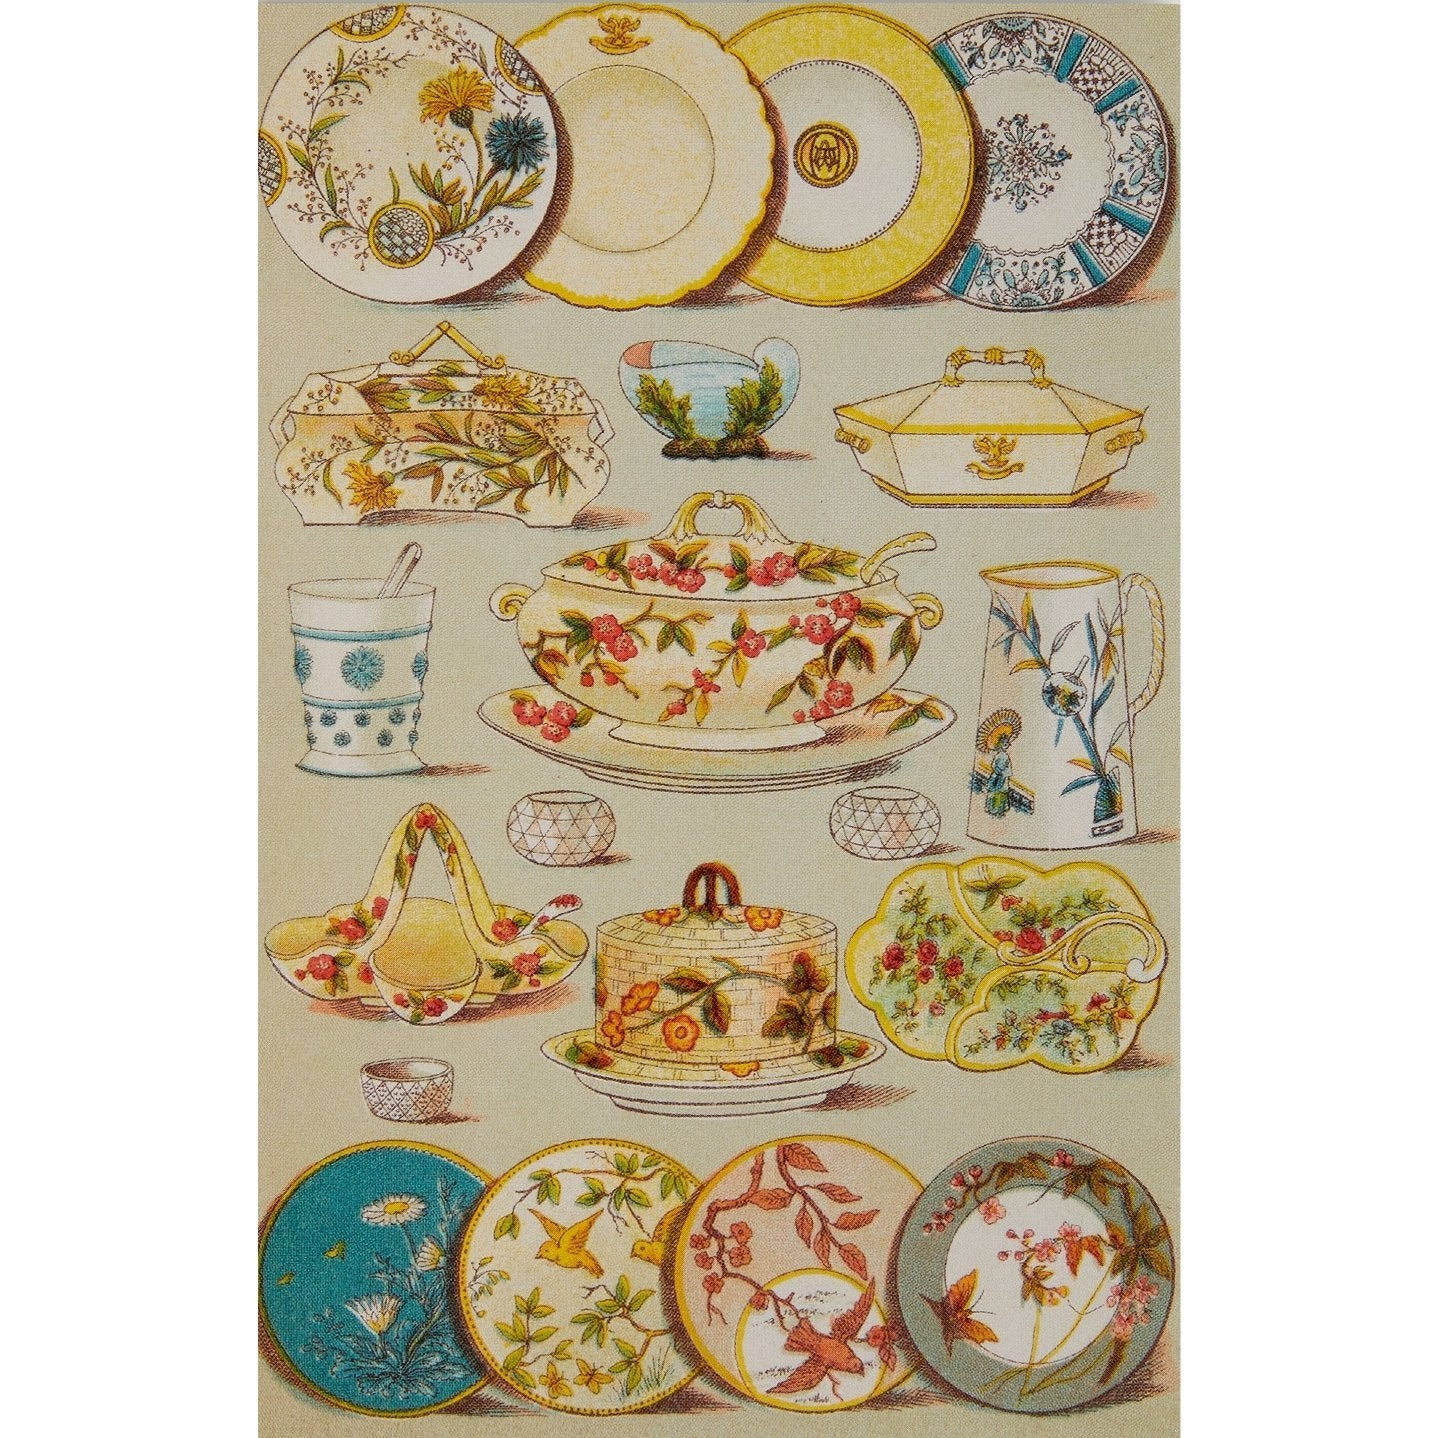 Notecard - Mrs Beeton's Book of Household Management, Dinner and Dessert China illustration. From the collection of Cambridge University Library, brought to you by CuratingCambridge.co.uk